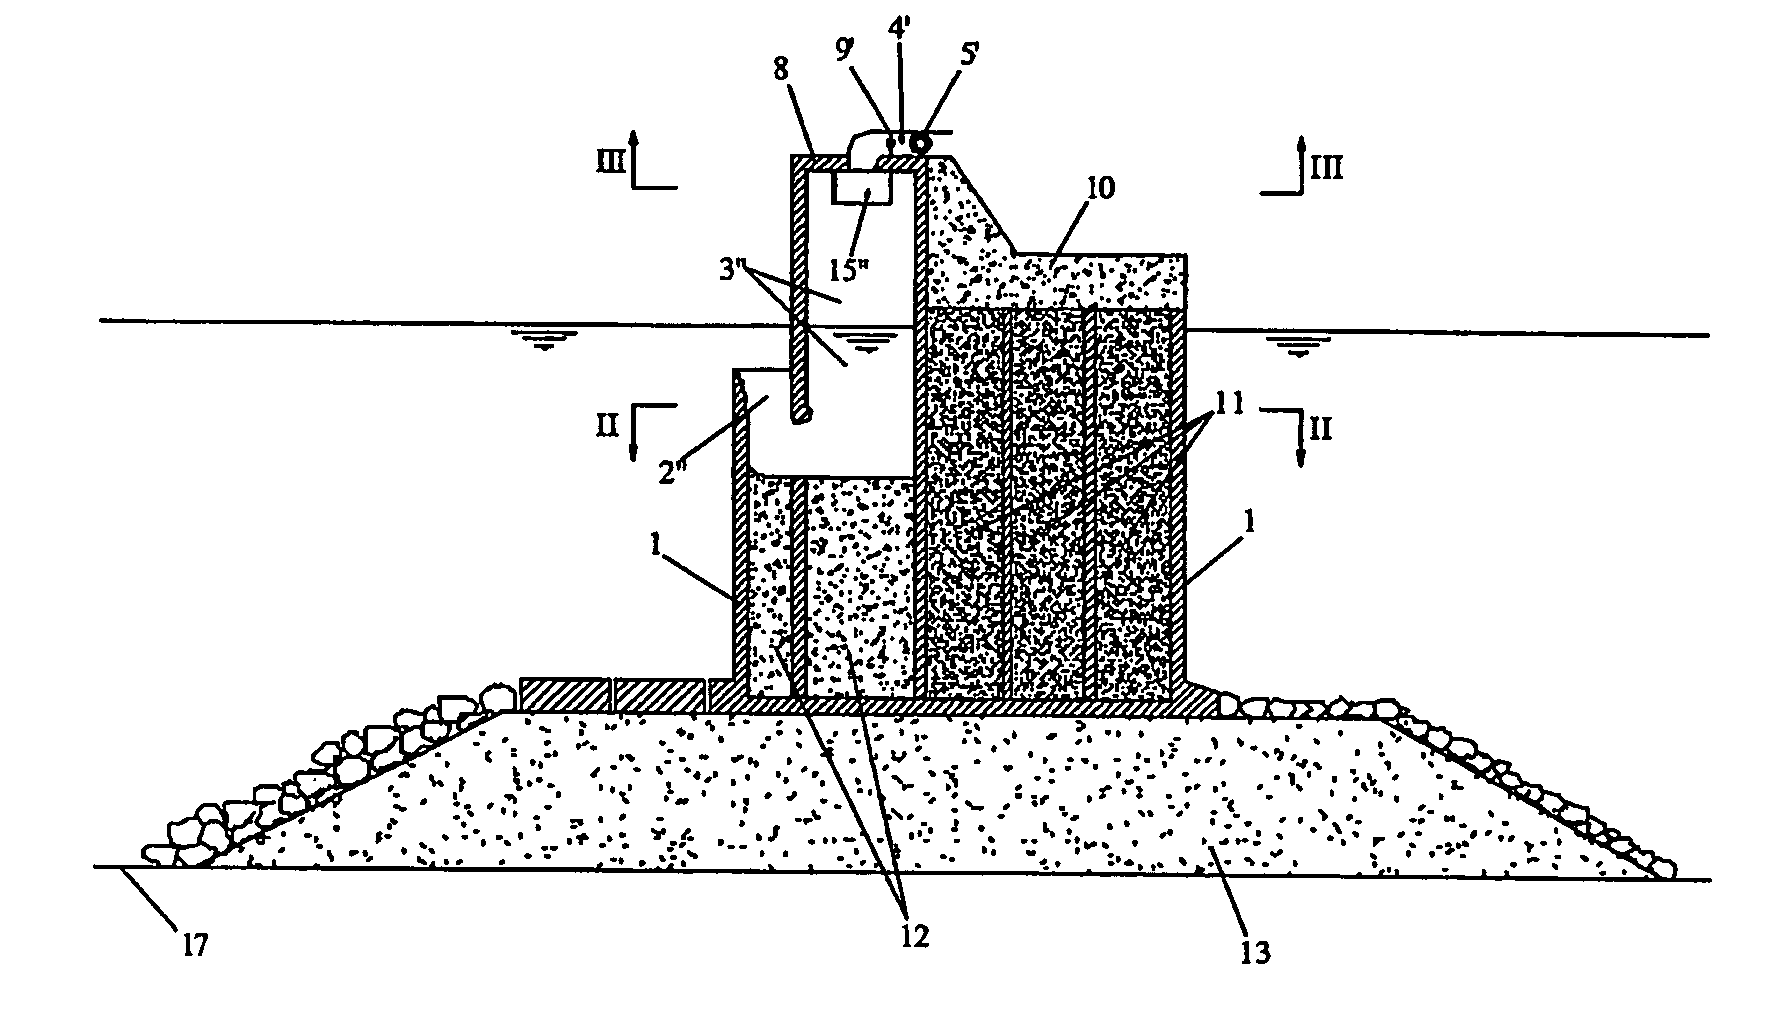 Oscillating water column wave energy converter incorporated into caisson breakwater